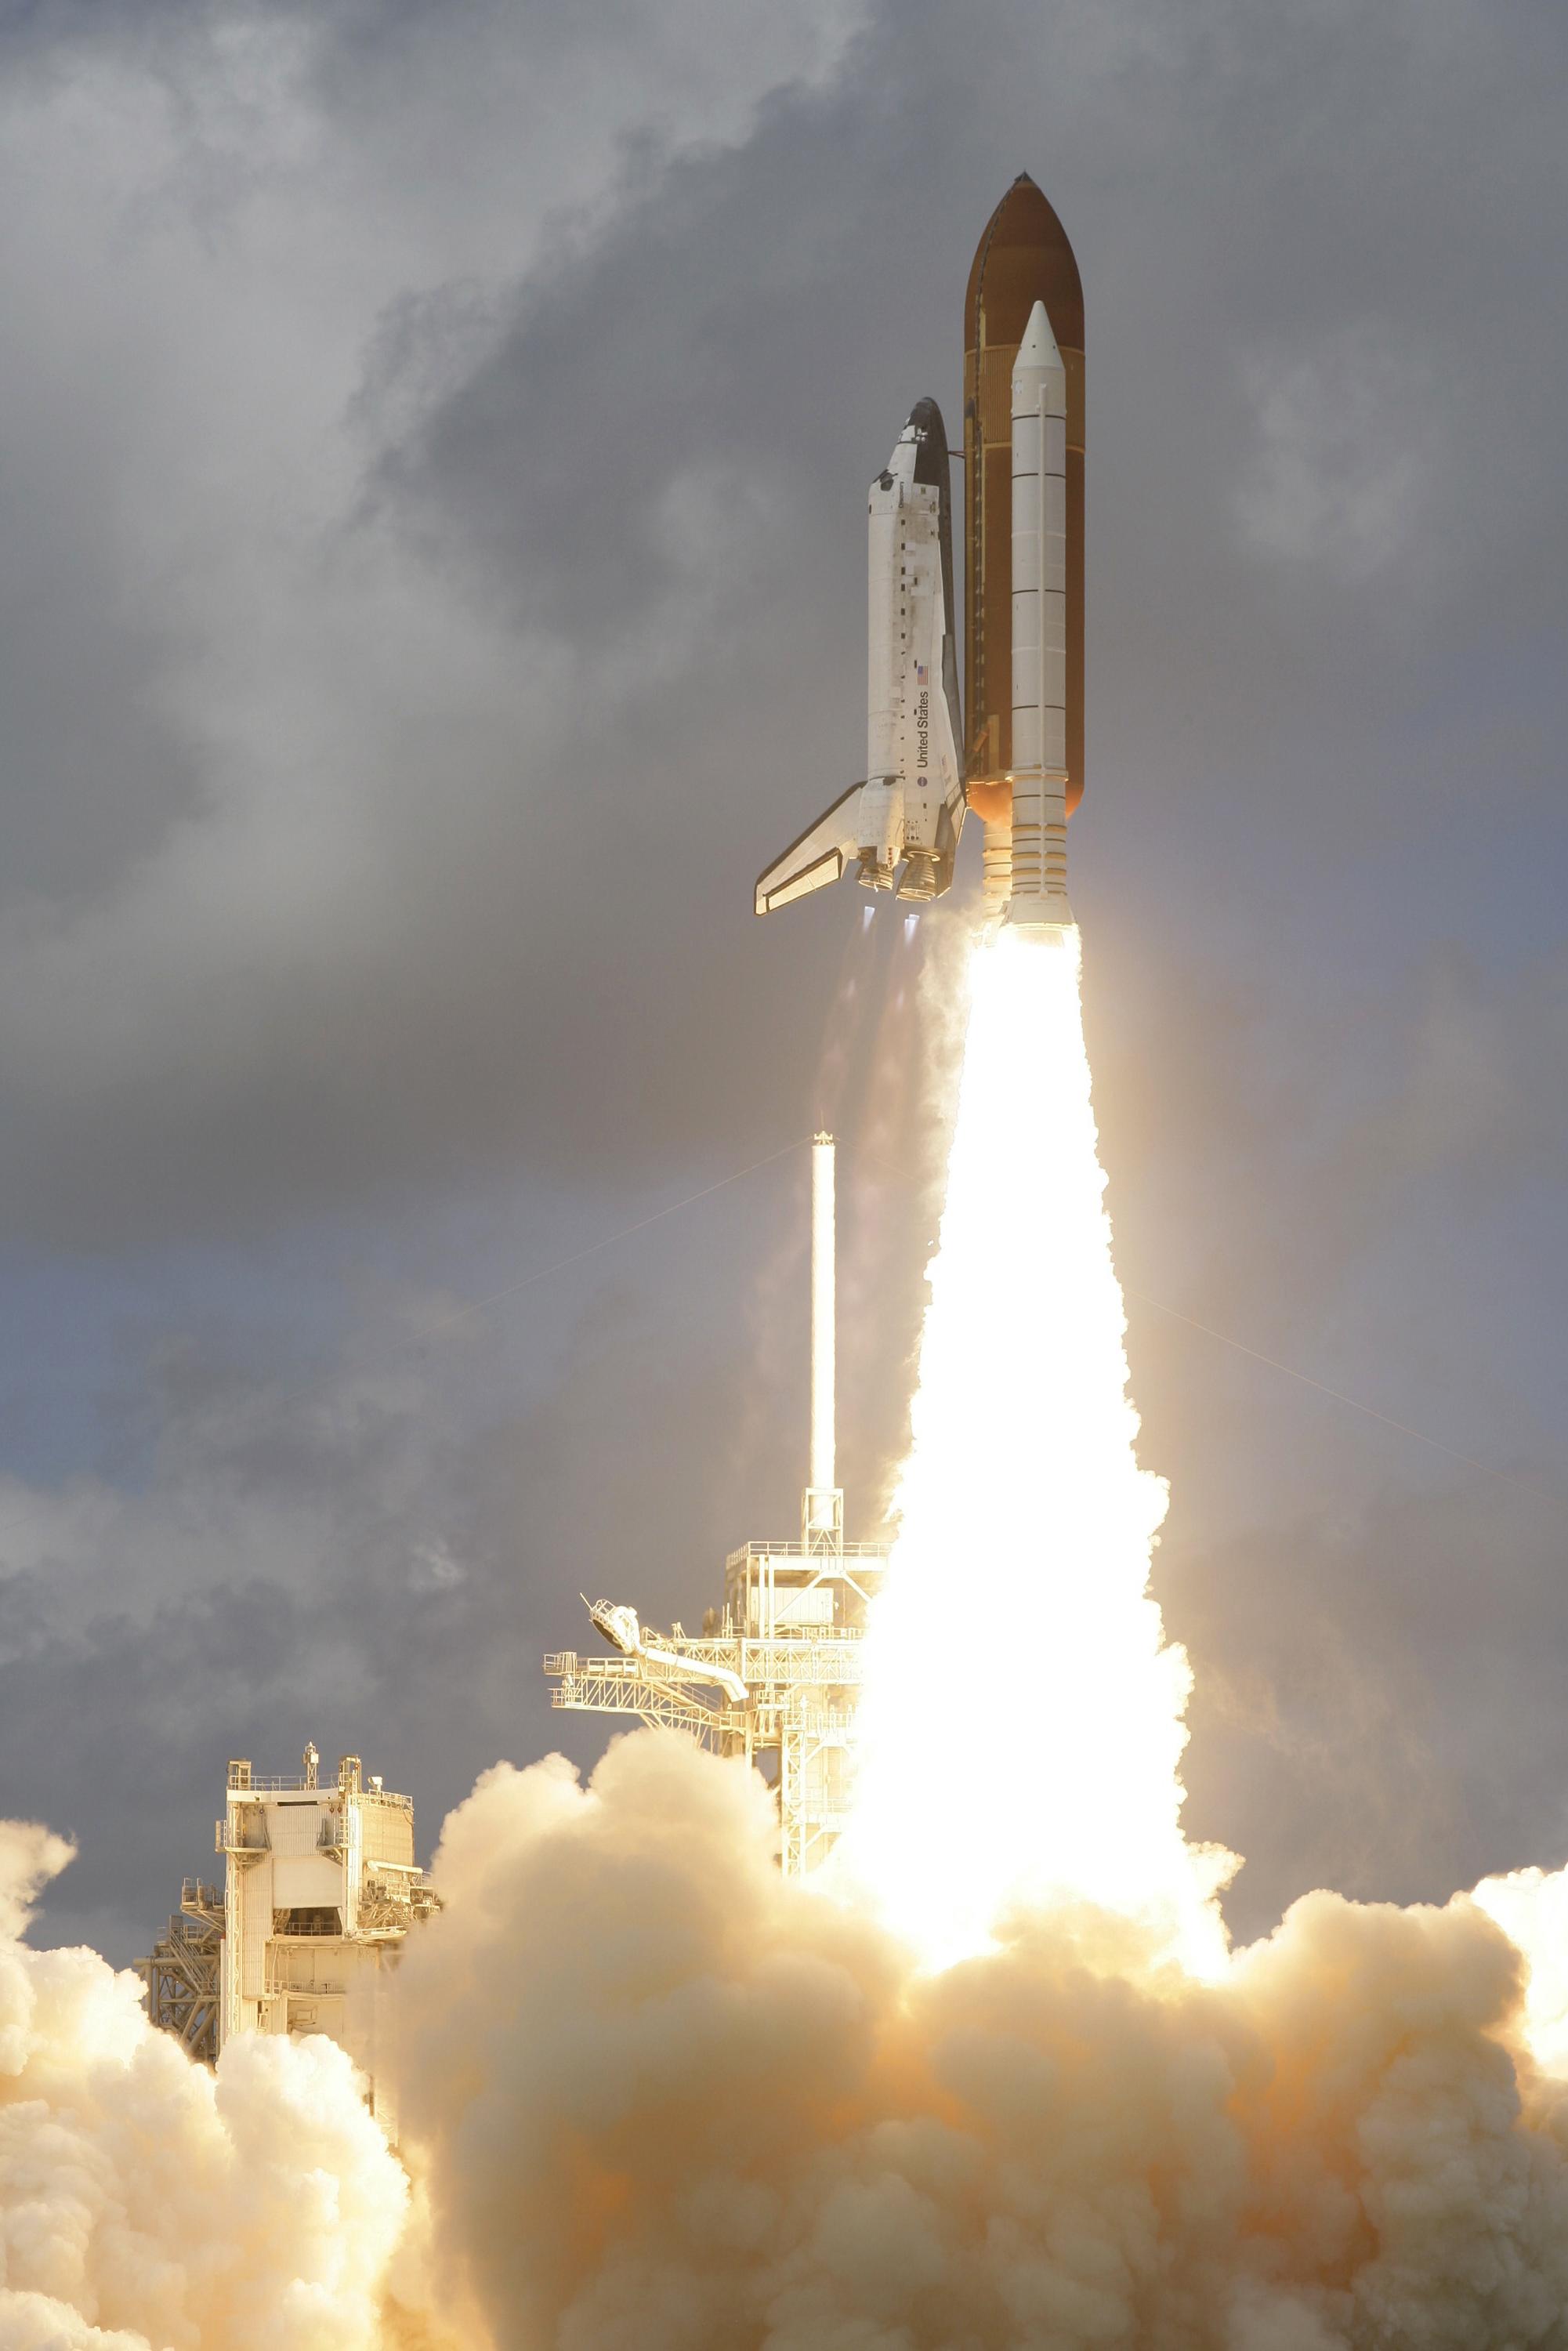 Airmen support space shuttle launch > U.S. Air Force > Article Display